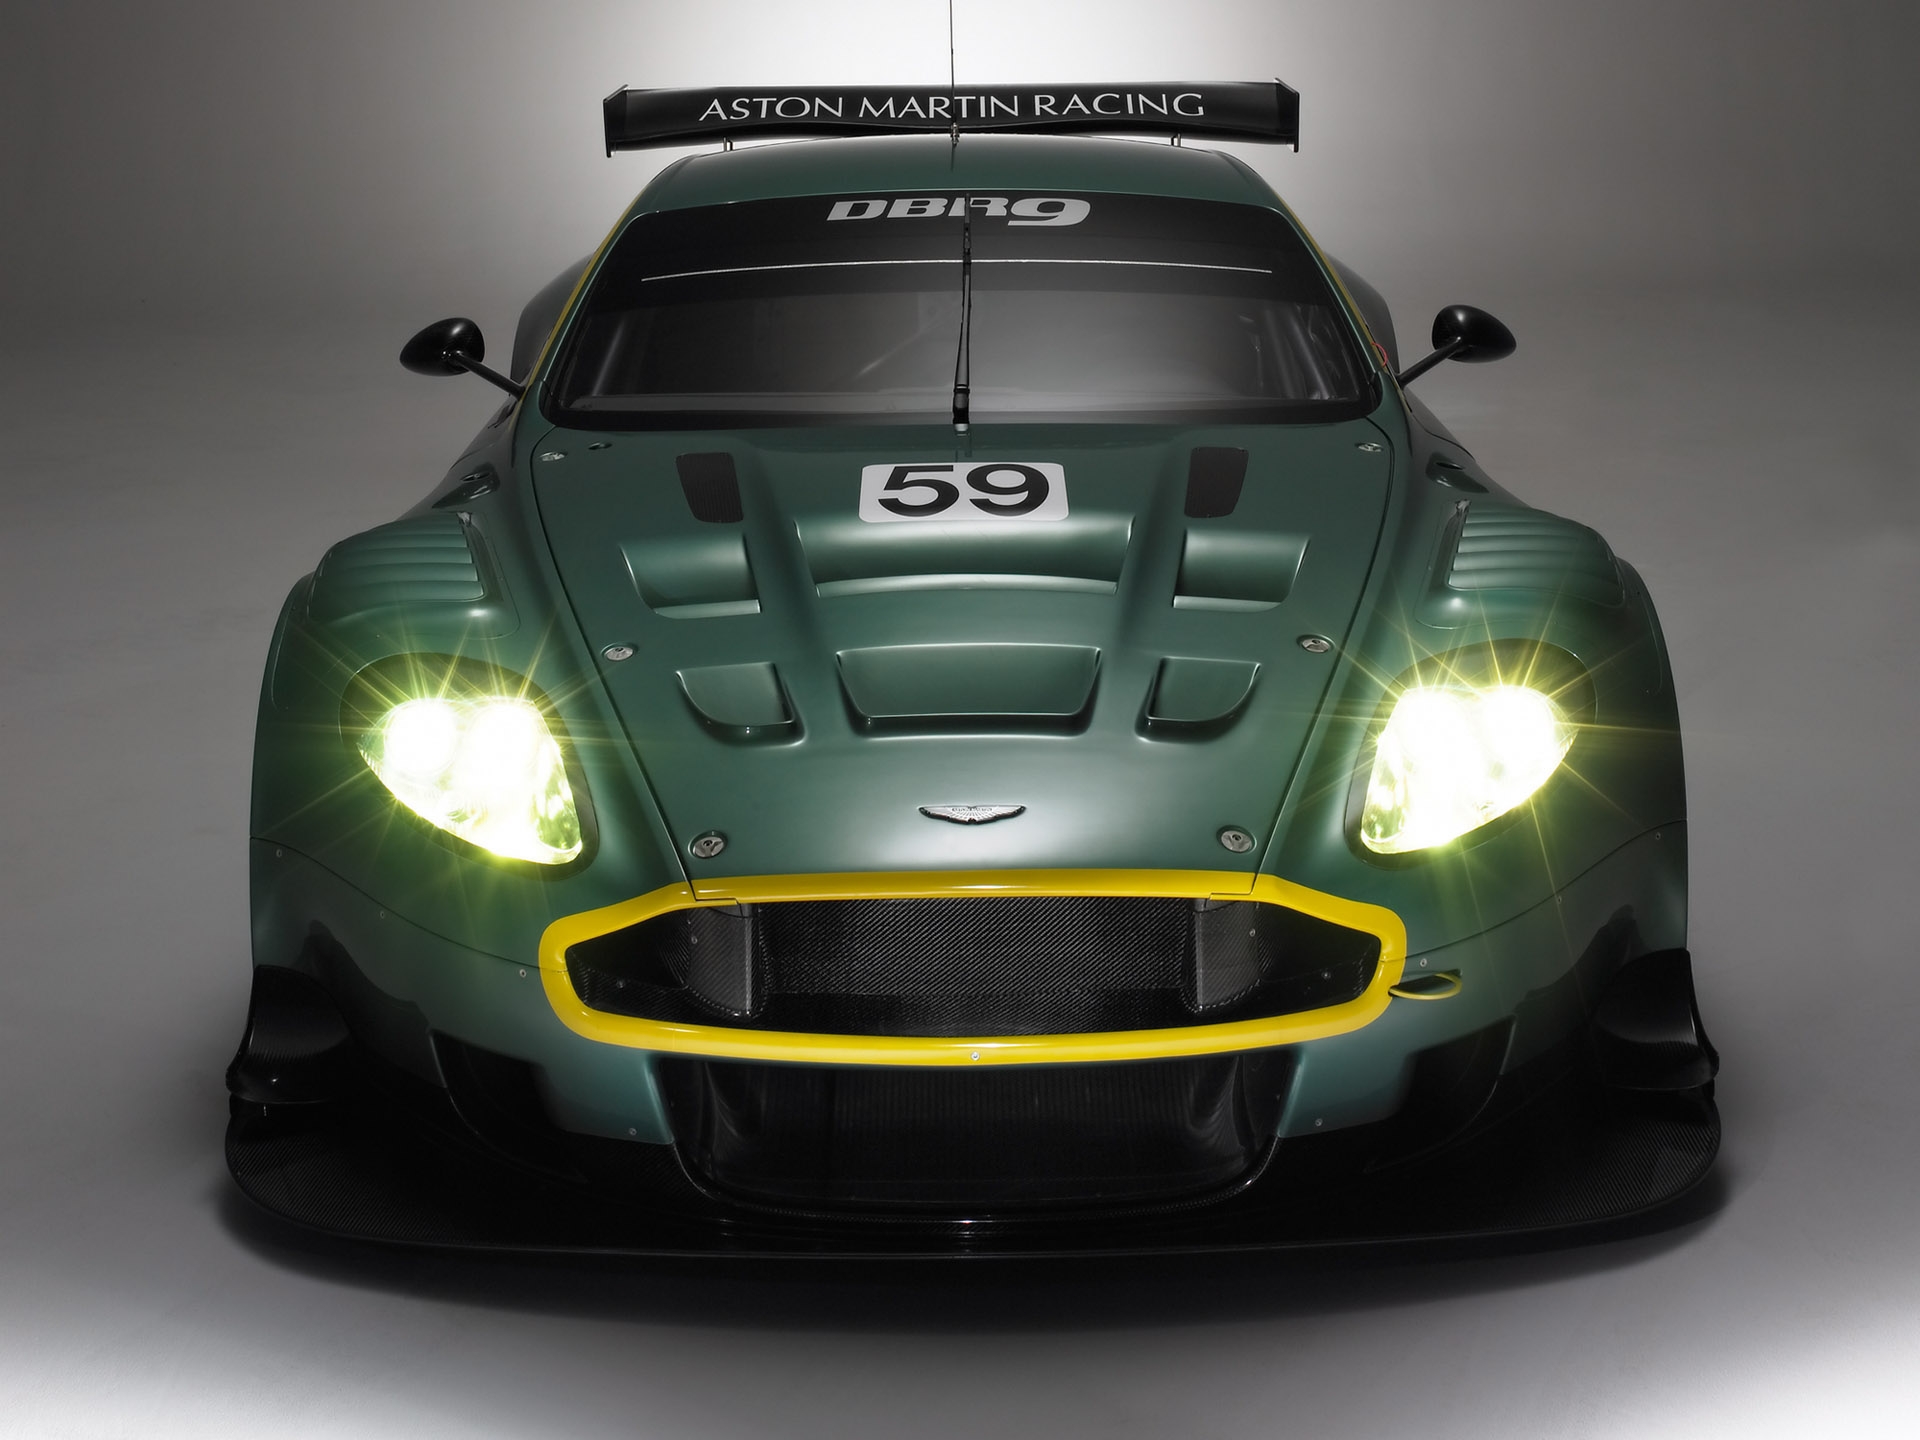 sports, auto, aston martin, cars, green, front view, style, 2005, racing car, dbr9